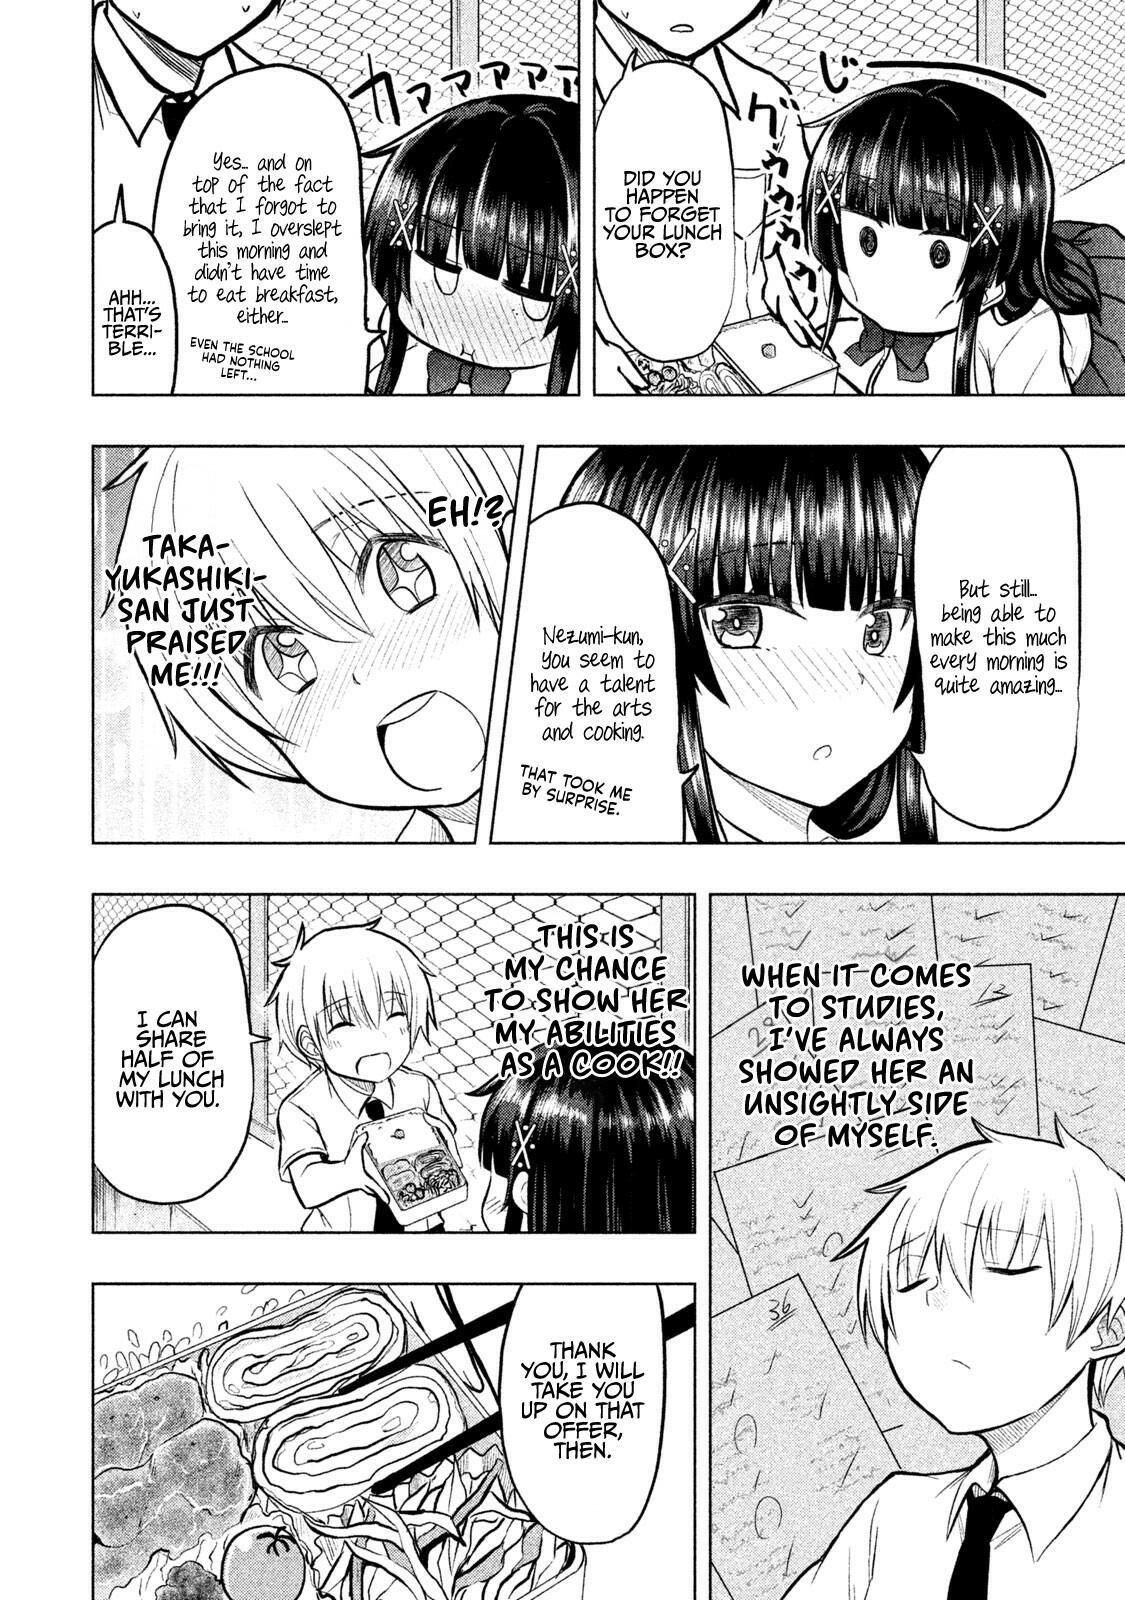 A Girl Who Is Very Well-Informed About Weird Knowledge, Takayukashiki Souko-San Chapter 21: Lunch Box page 3 - Mangakakalots.com